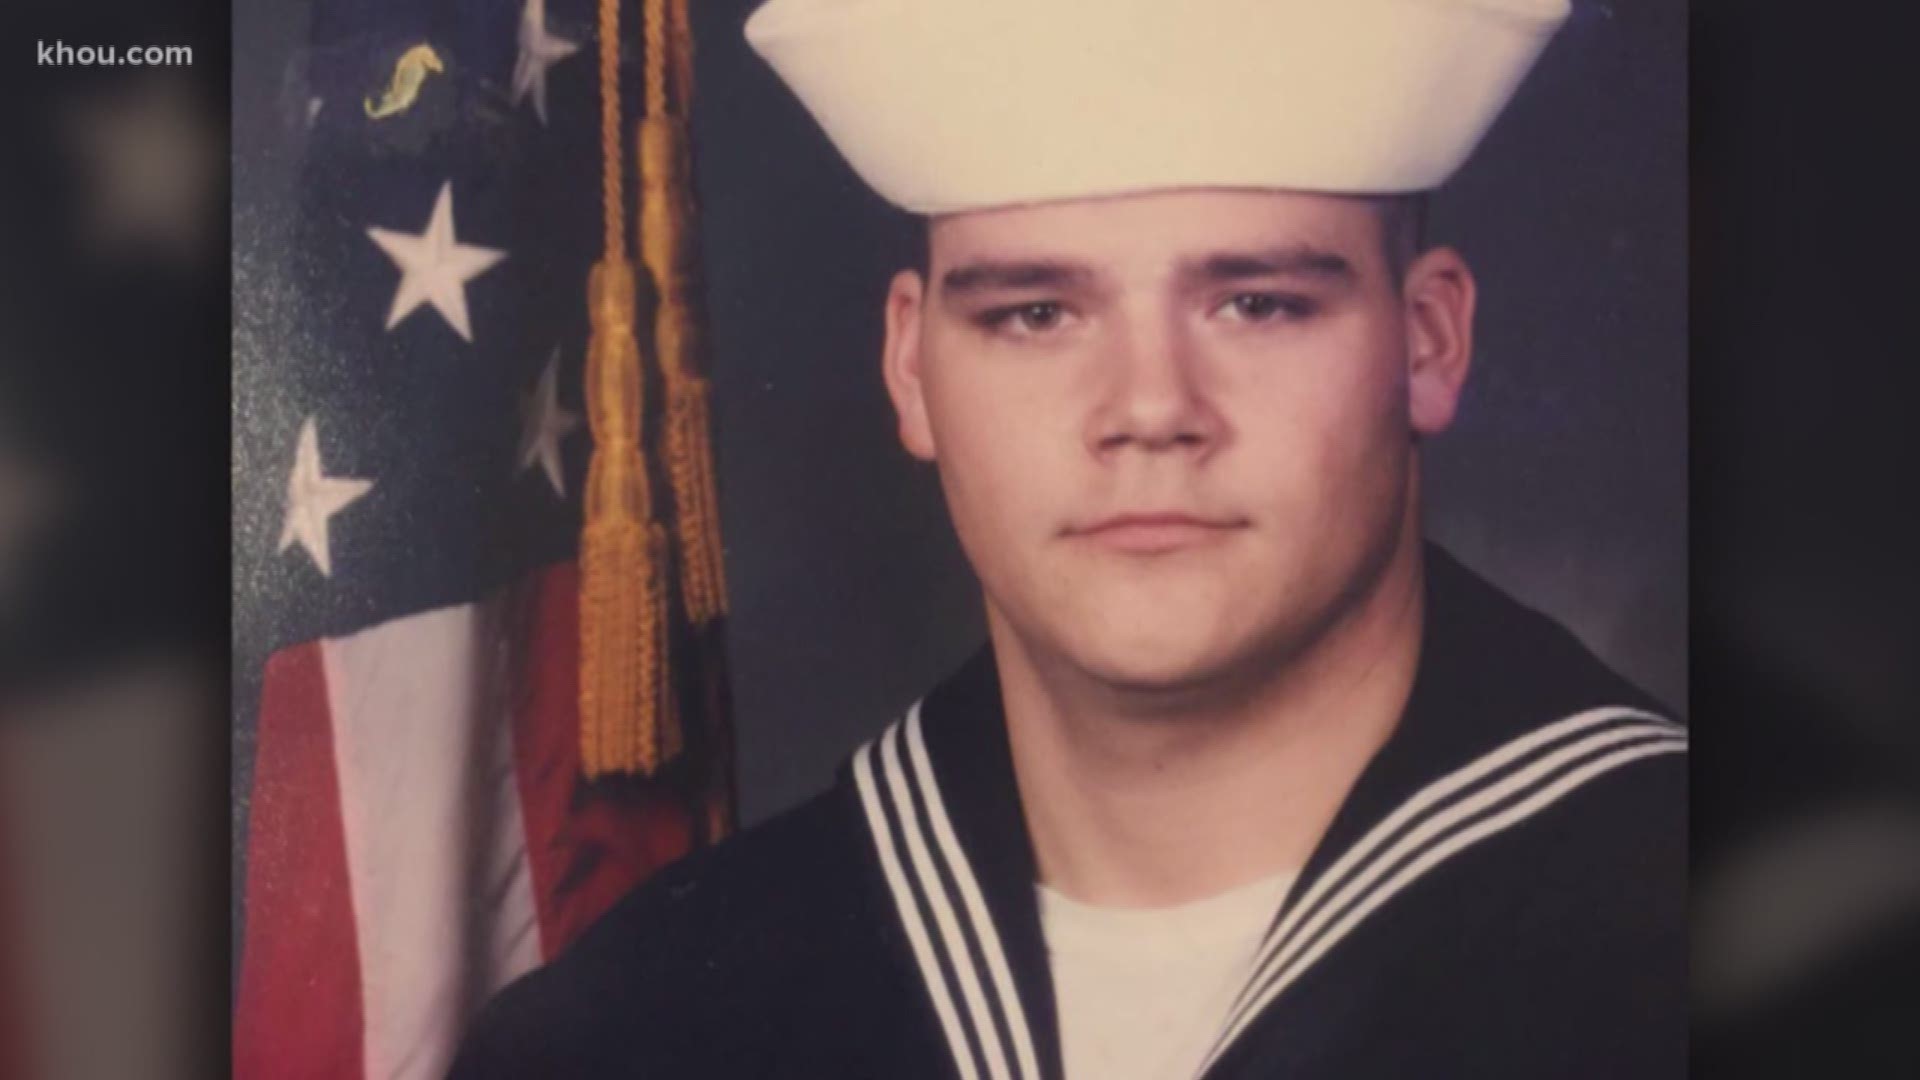 By the end of August, a U.S. Navy veteran from Richmond will find out if he will spend 30 years in a Thai prison for a crime his family says they can prove he didn’t do.